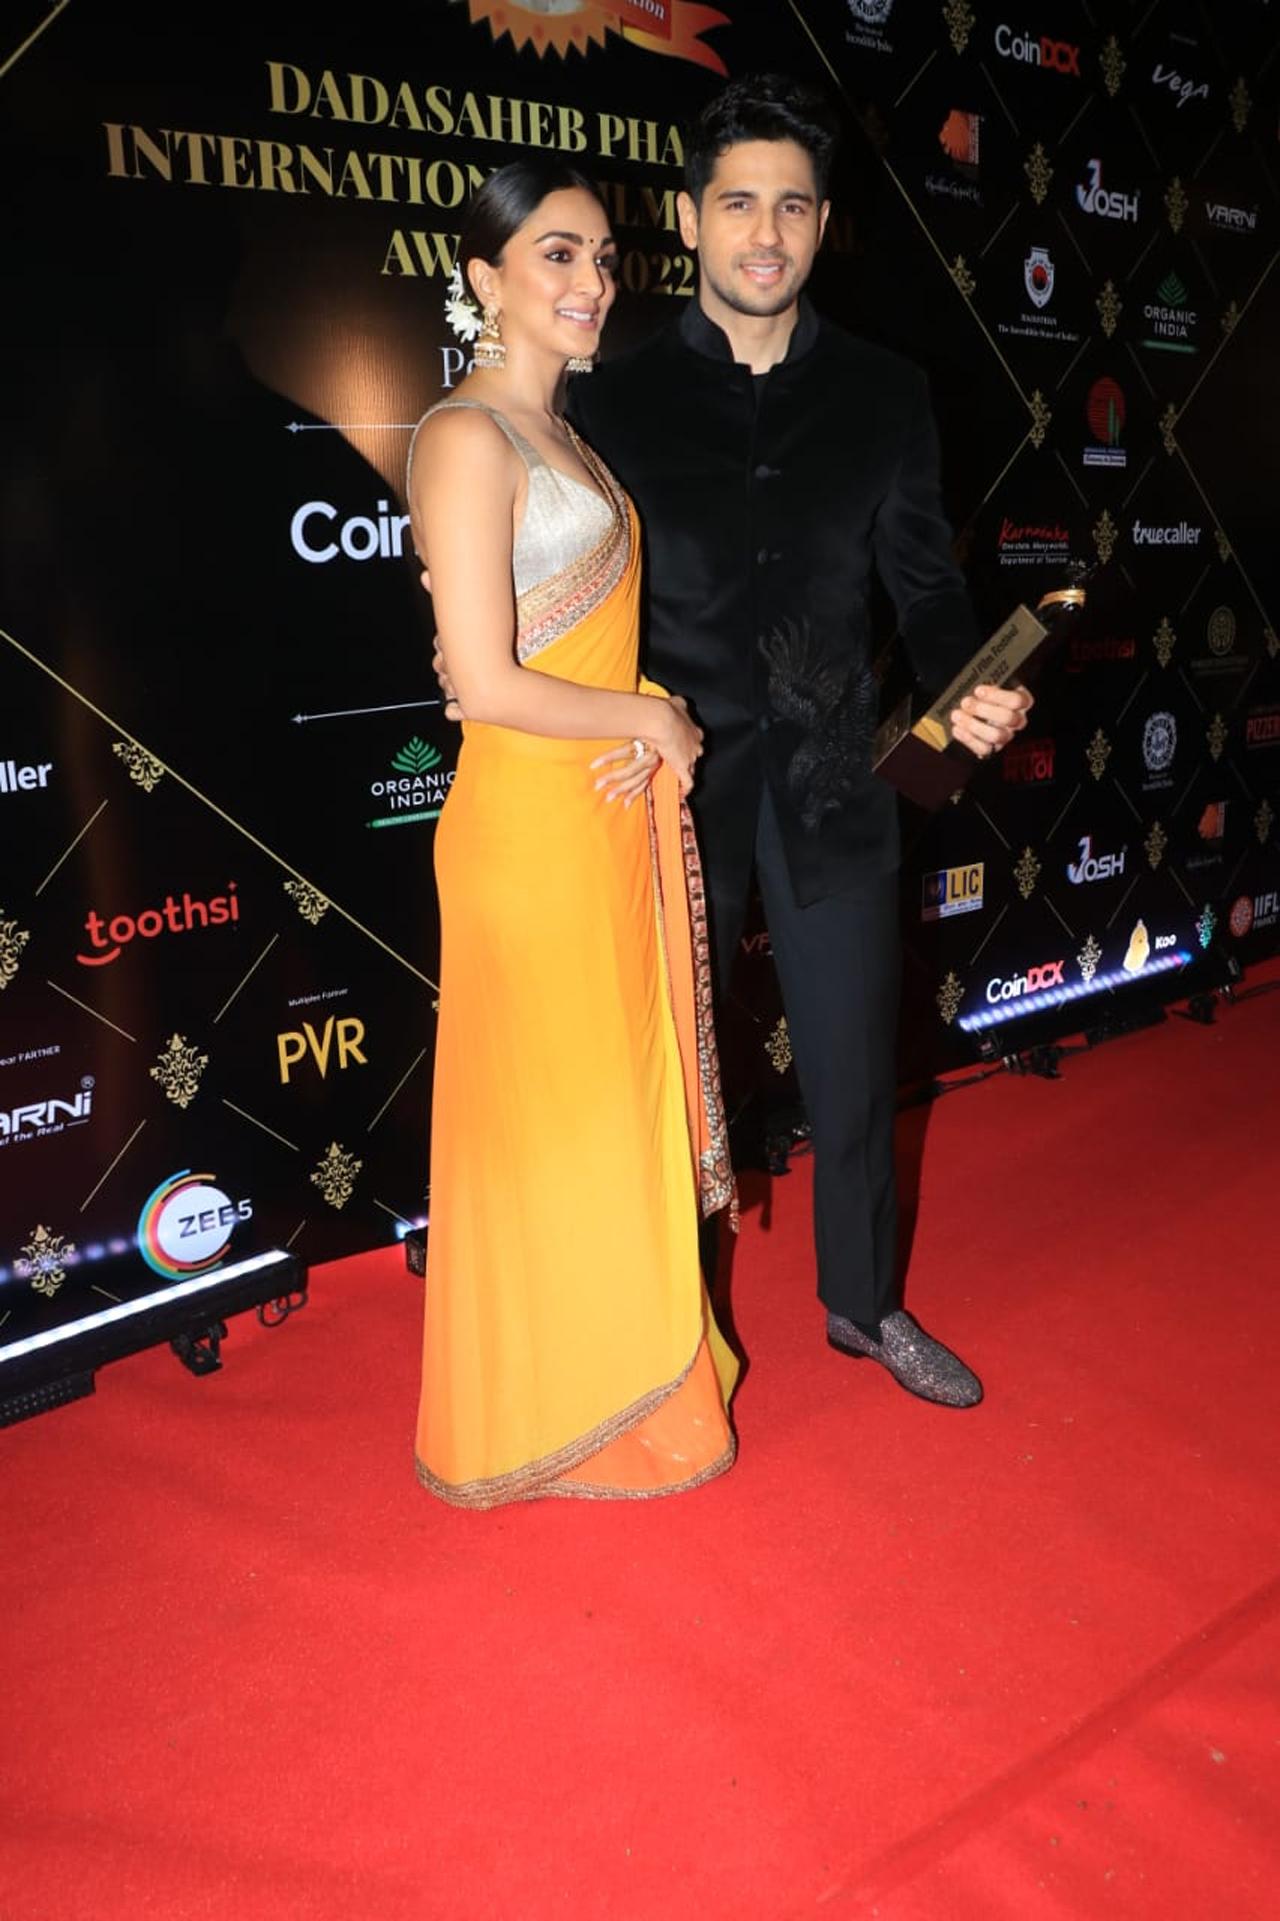 The prestigious Dadasaheb Phalke International Film Festival Awards 2022 were held on Sunday and were graced by several stars including Asha Parekh, Lara Dutta, Sidharth Malhotra and Kiara Advani. The Shershah actress was seen wearing a pretty saree, whereas Sidharth suited up for the ceremony.